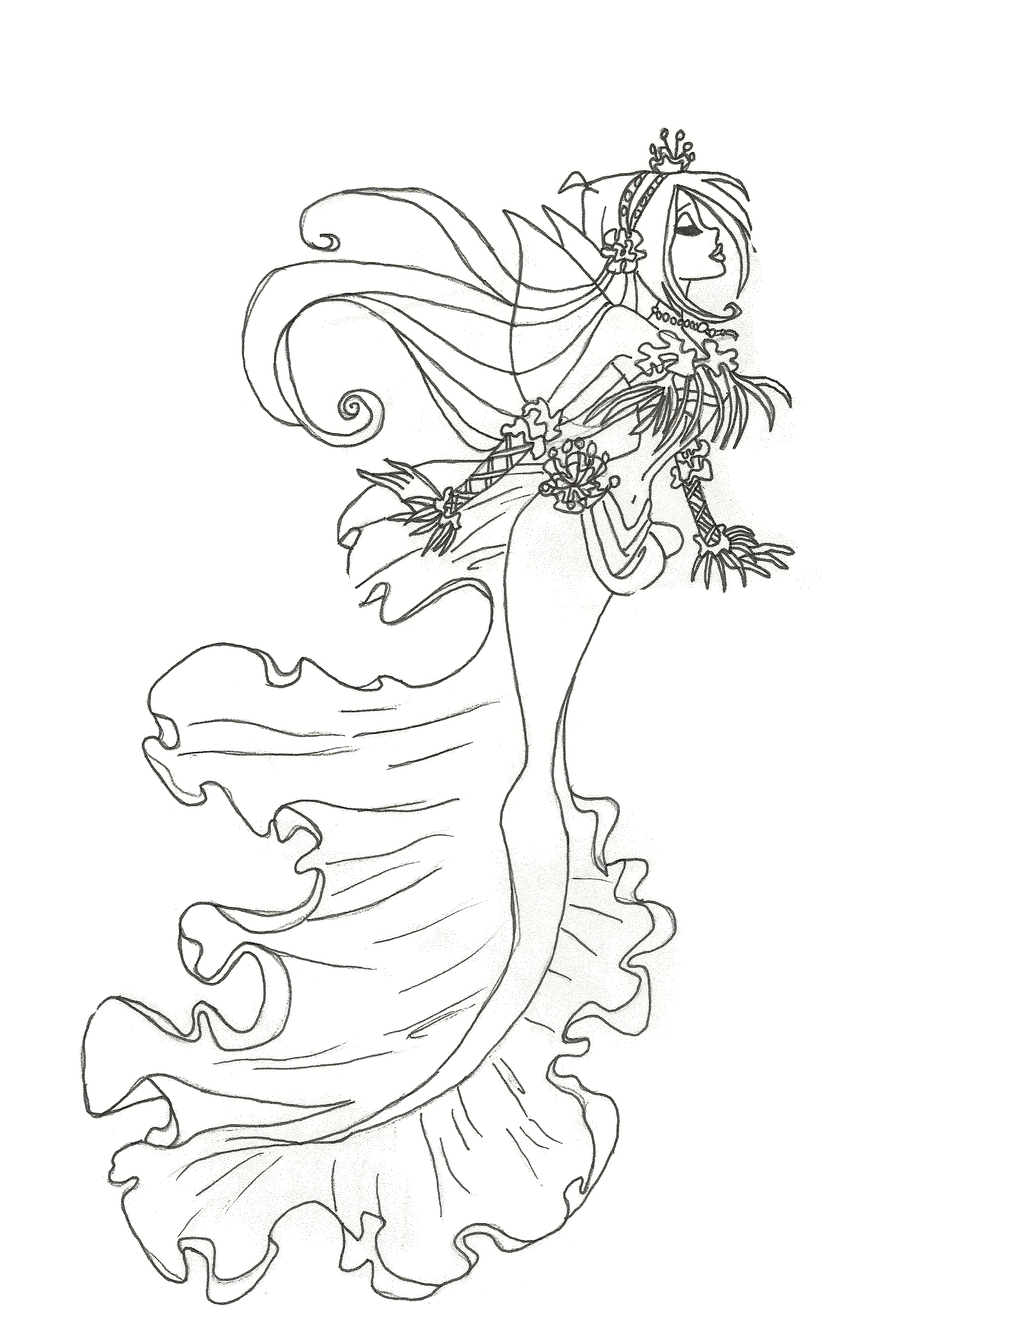 Winx Mermaid coloring pages to print and download for free